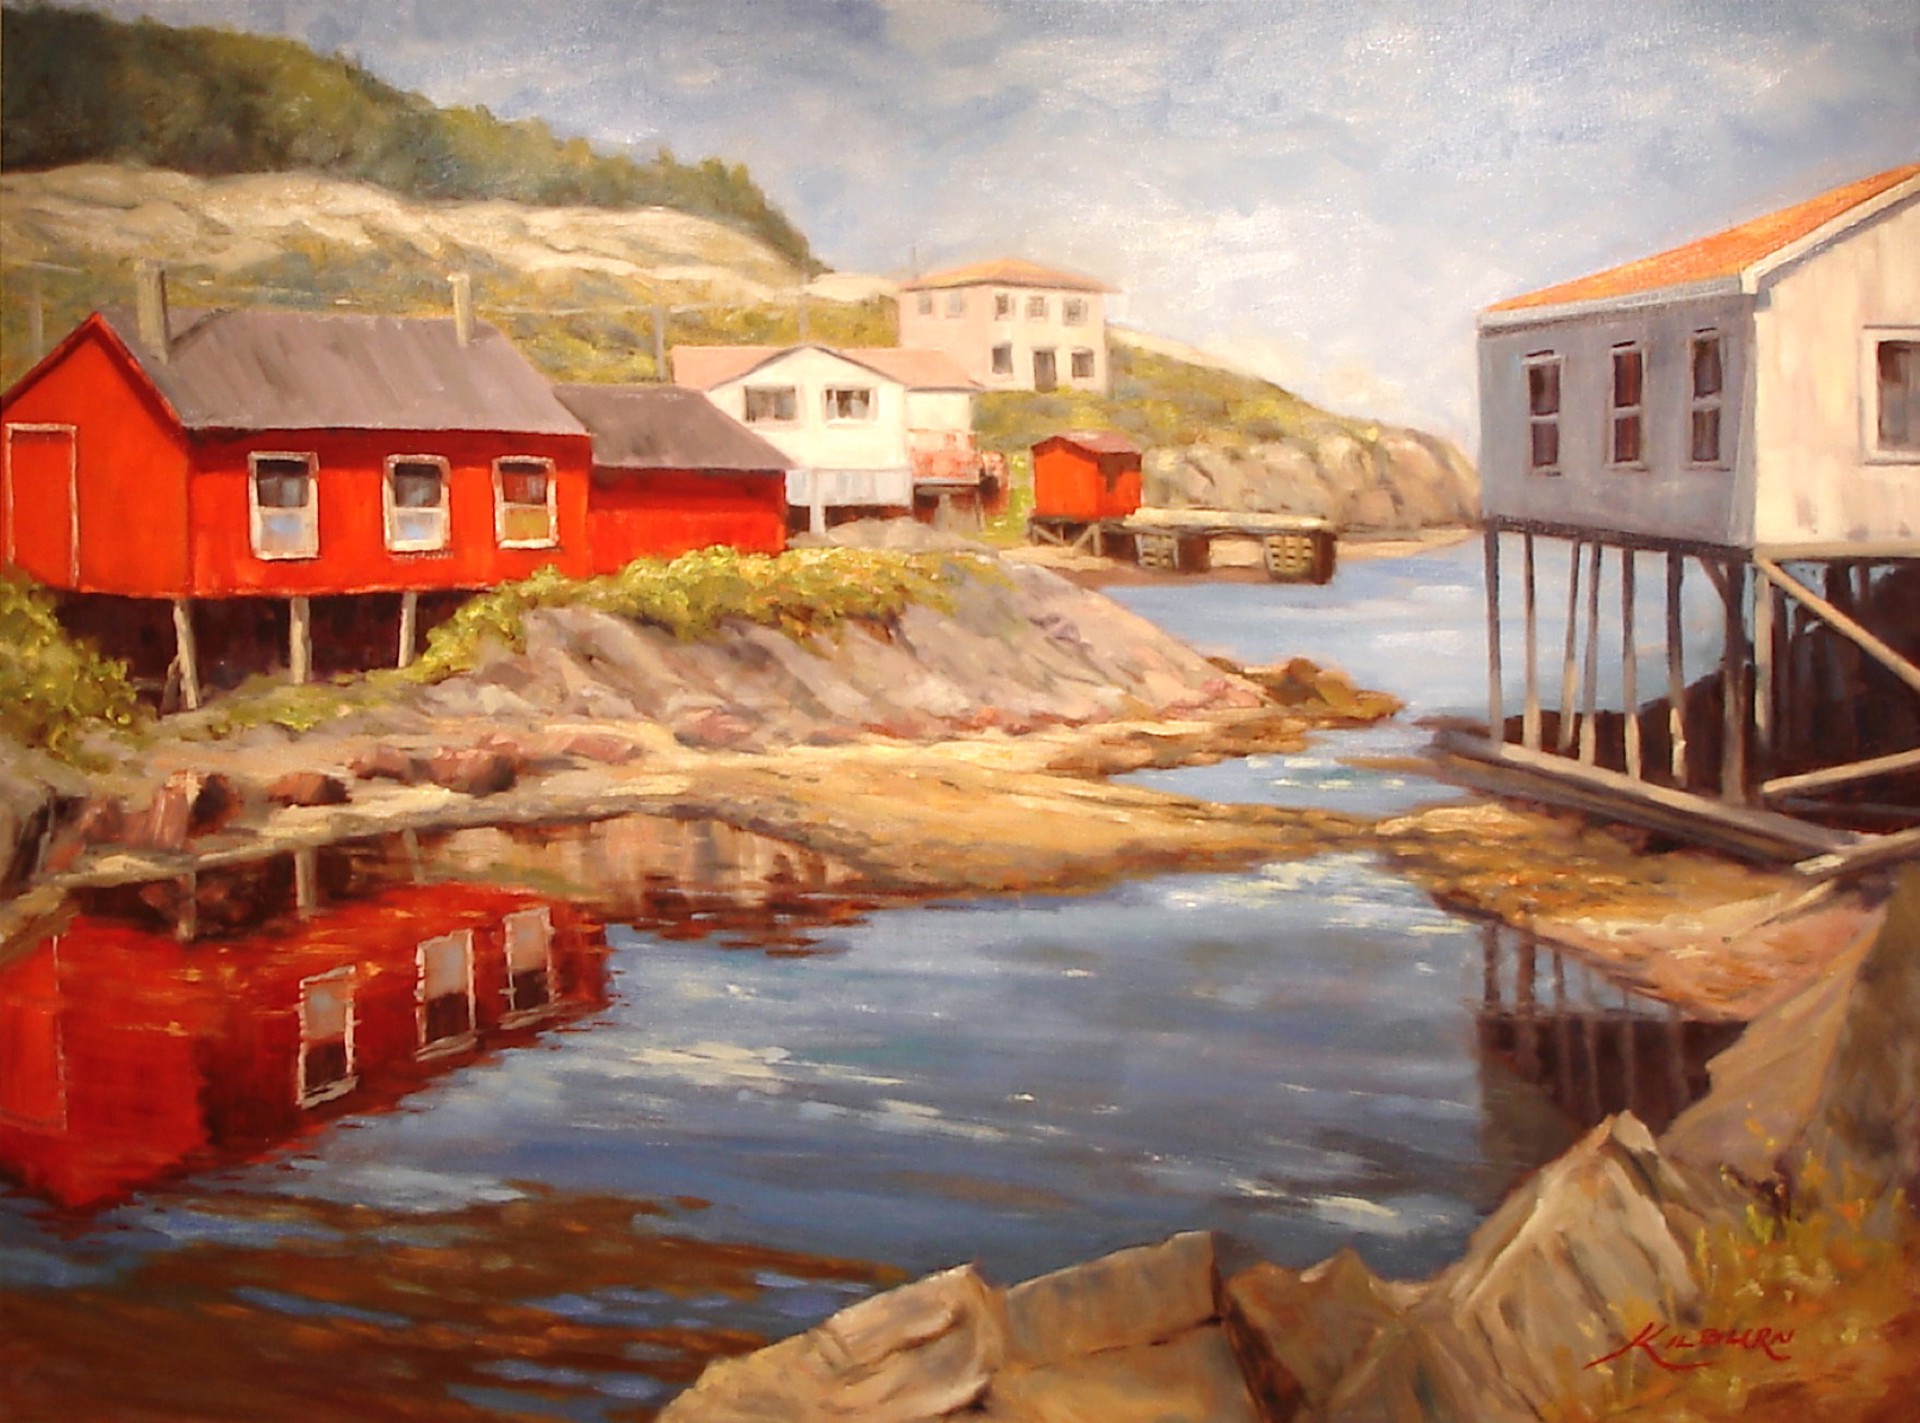 “Red & White in Salvage” Salvage, NL by Michael Kilburn